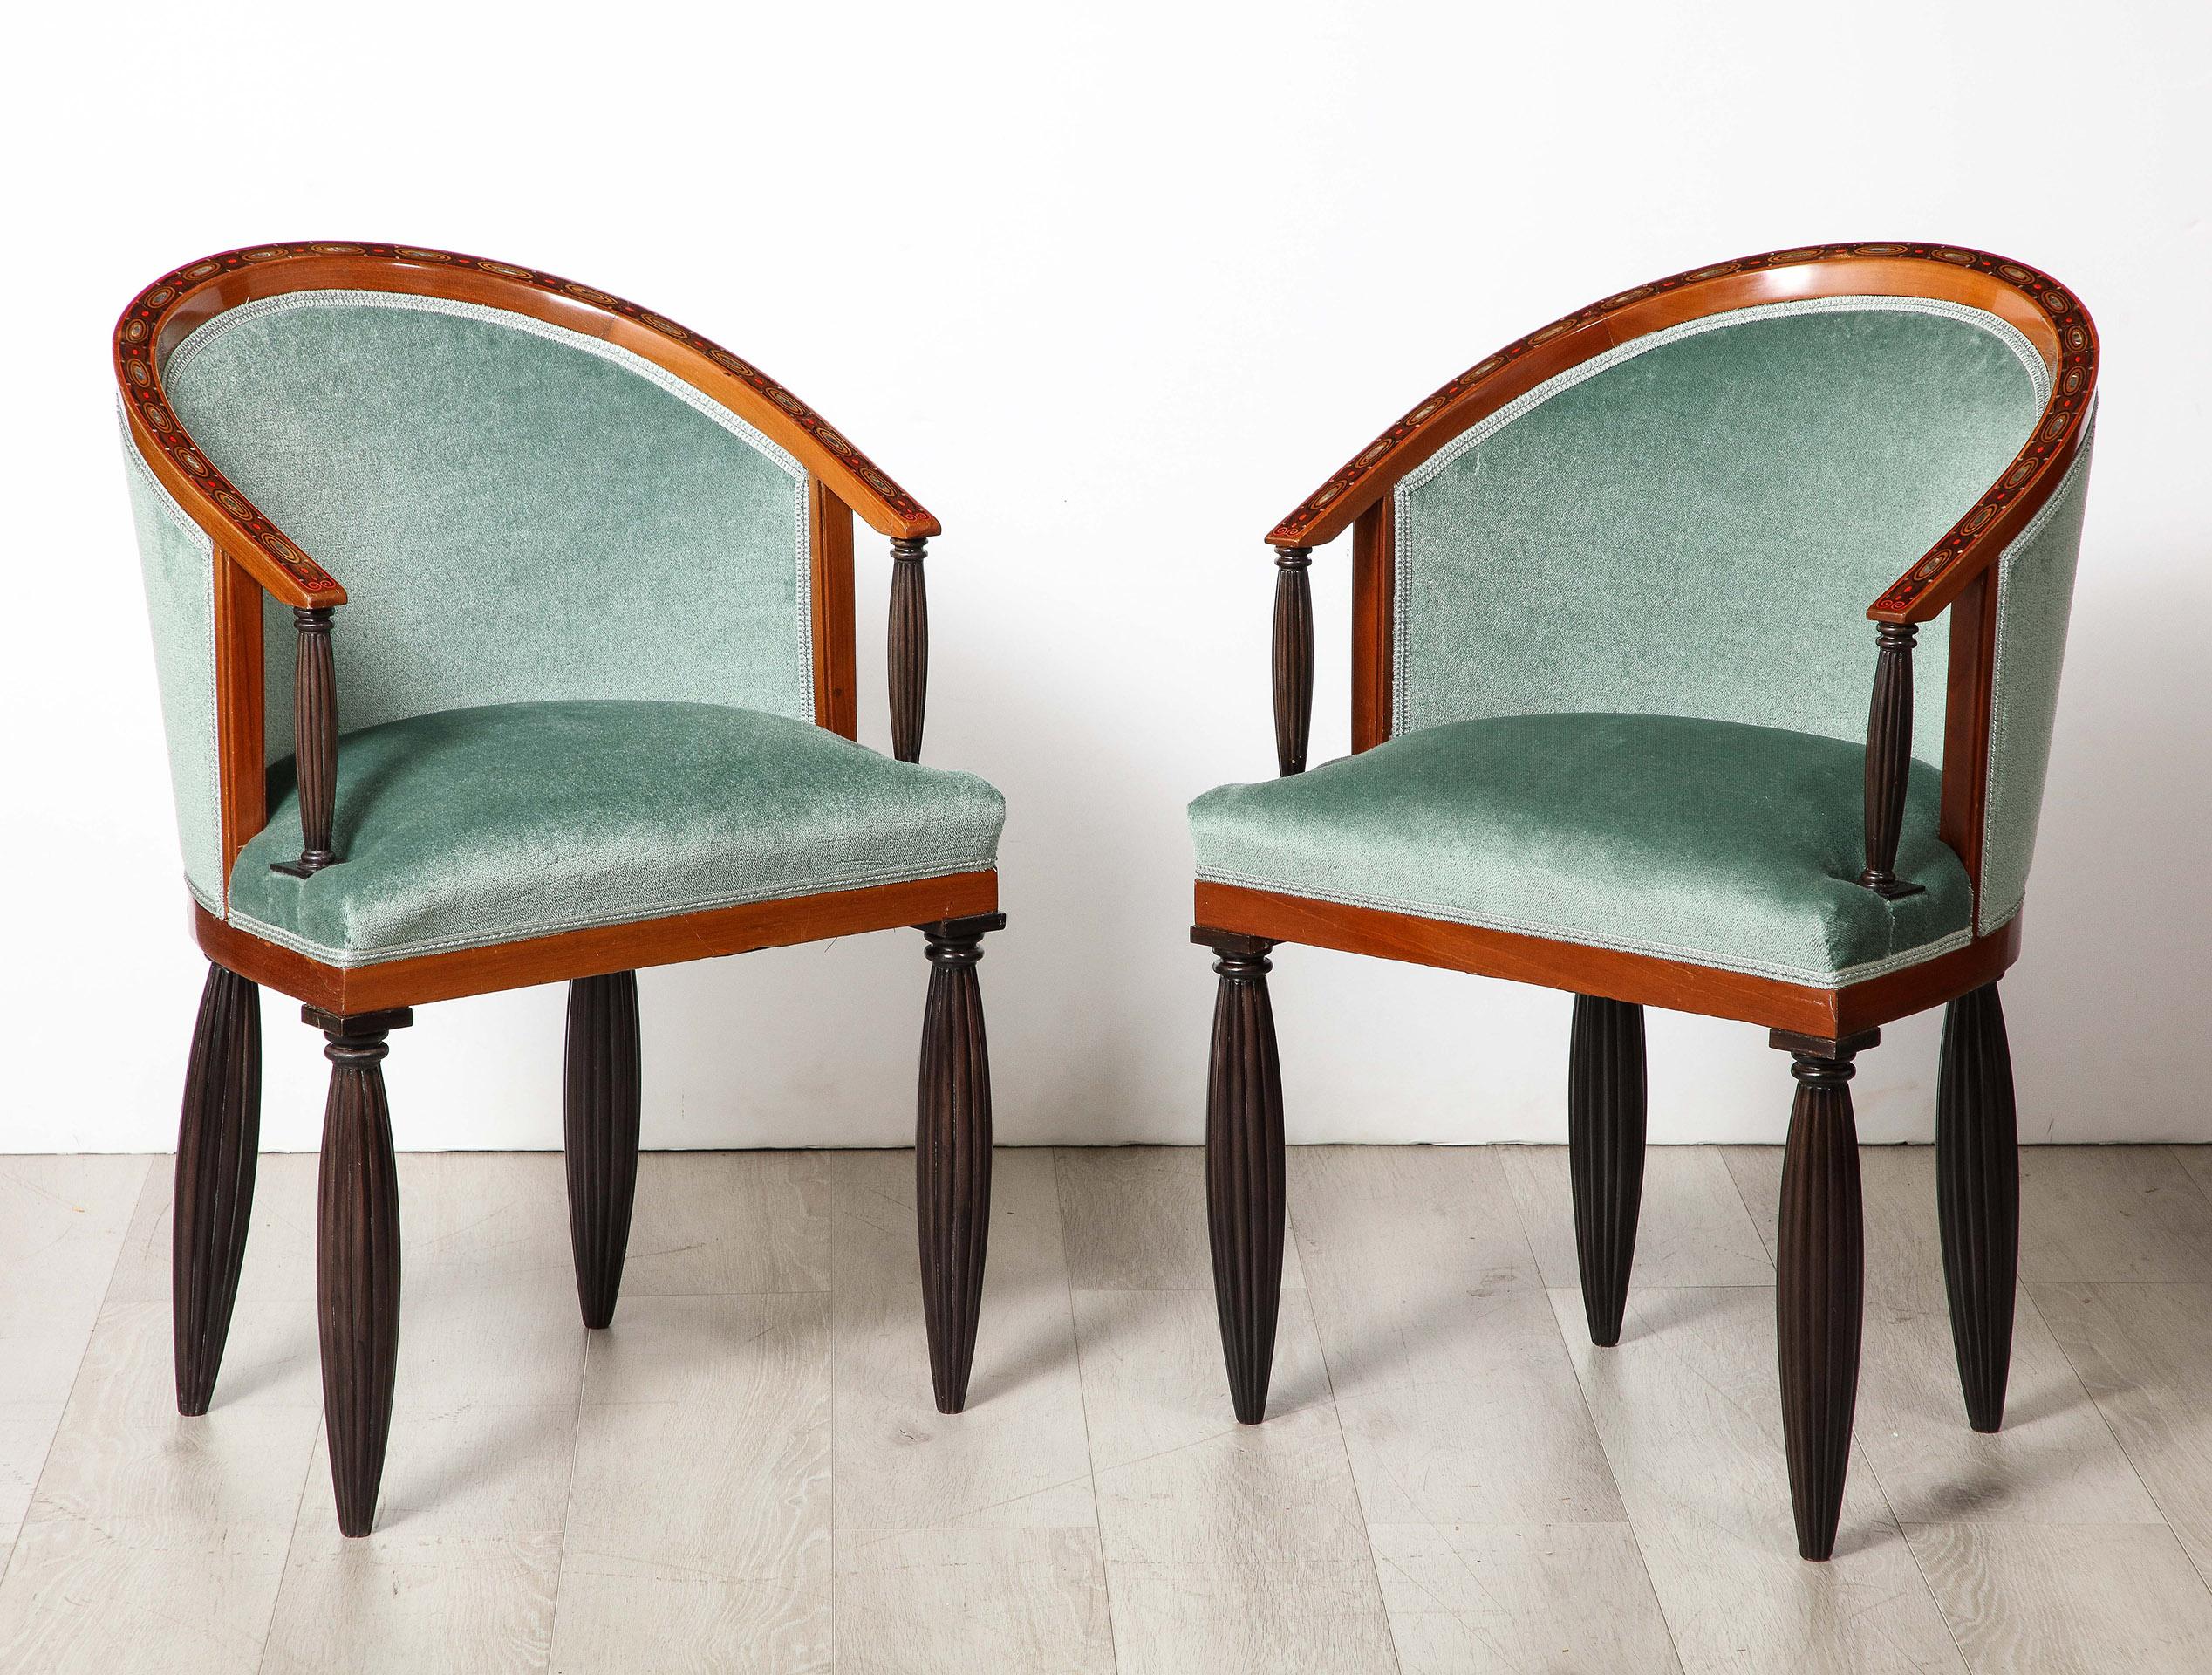 A superb example of early Art Deco Design by Maurice Dufrene. Each of the eight (8) dining chairs is constructed a frame intricately inlaid with  fruit wood and Mother-of-Pearl. The frame inset with Rosewood fluted columns and supported by 4